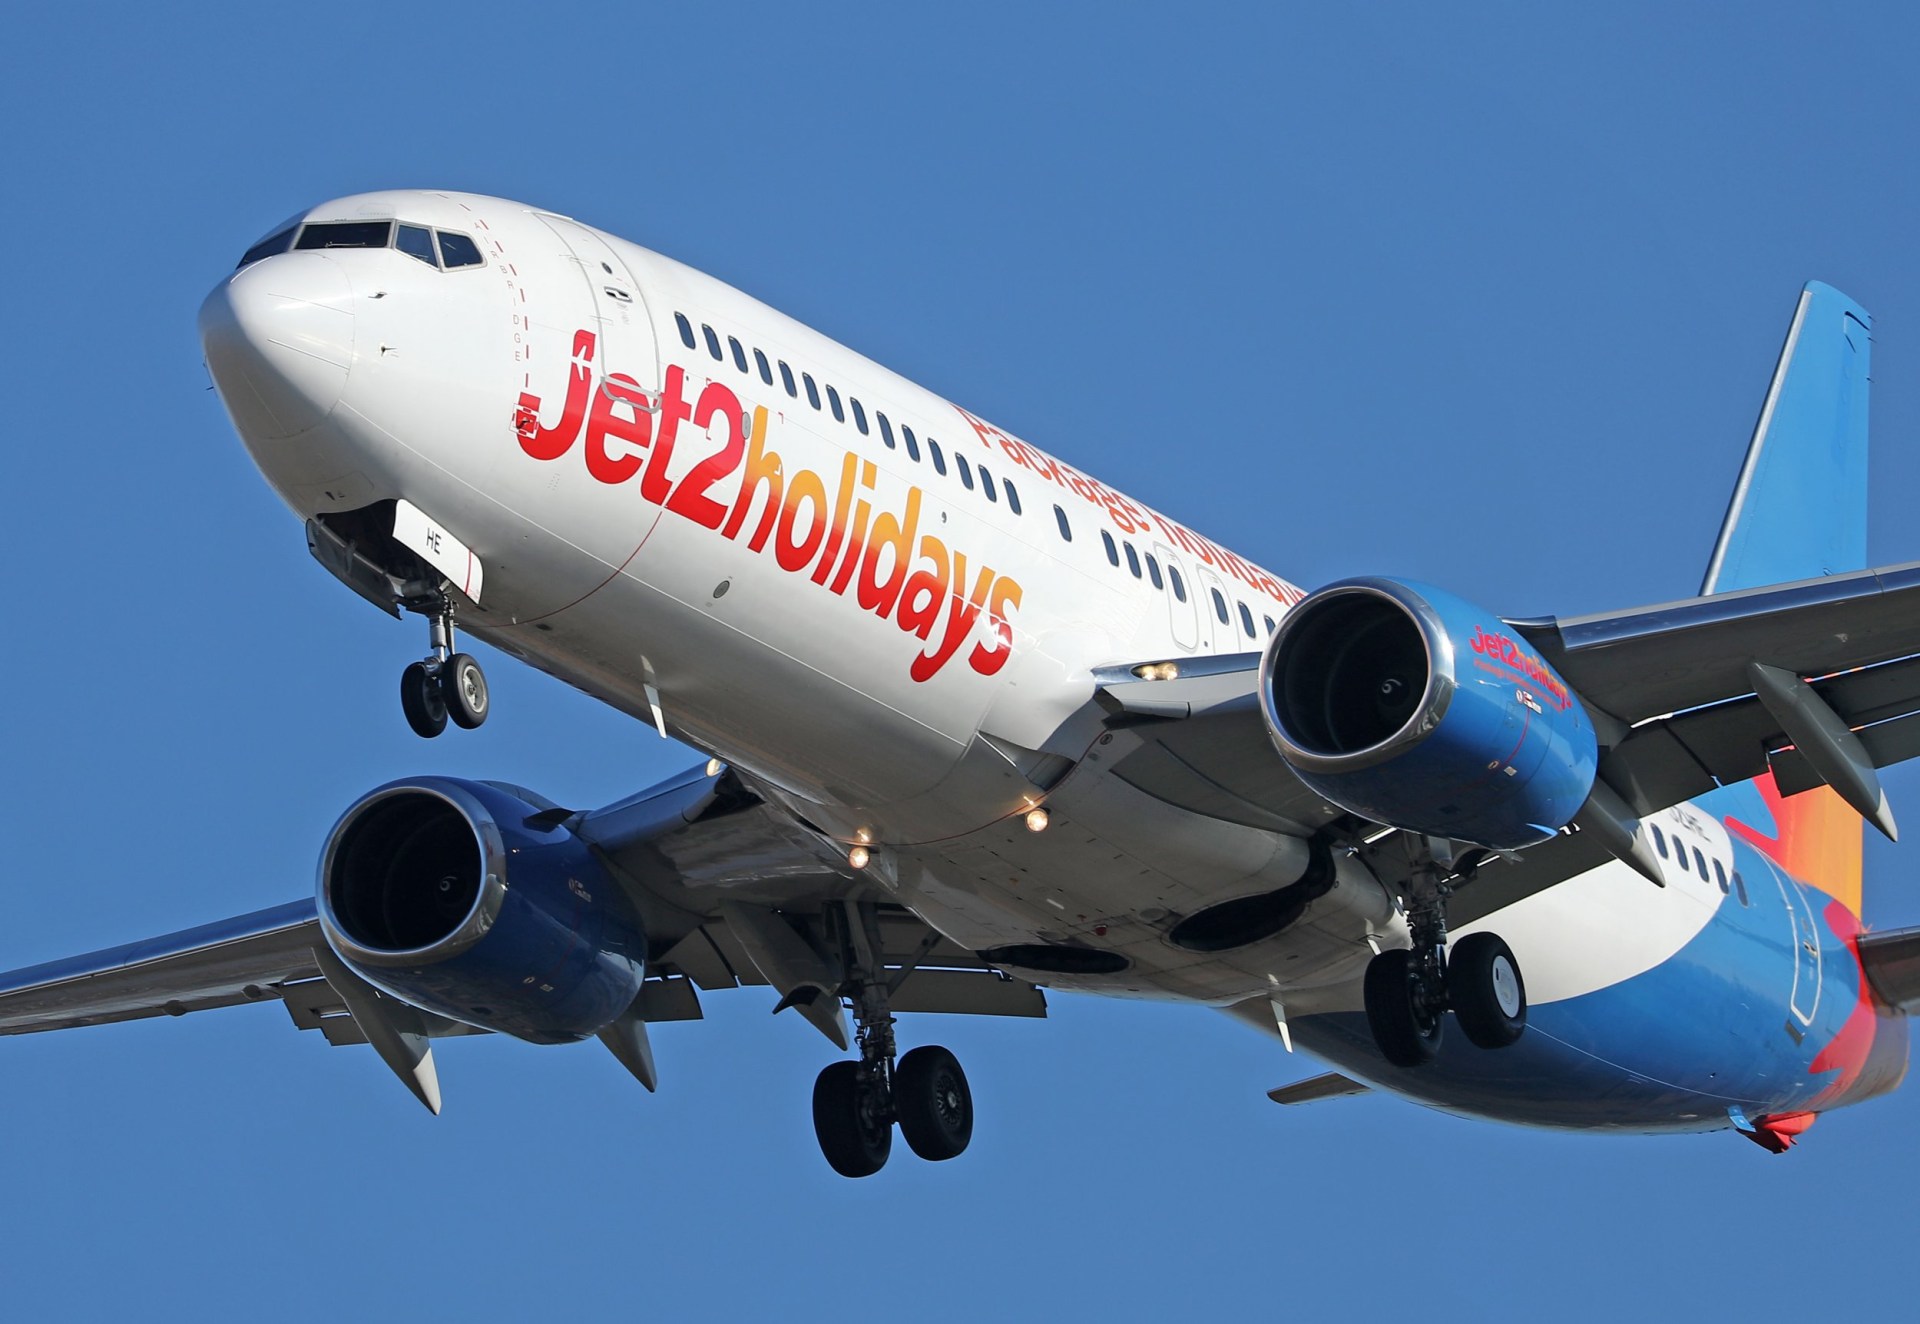 jet2 announces major change to package holidays